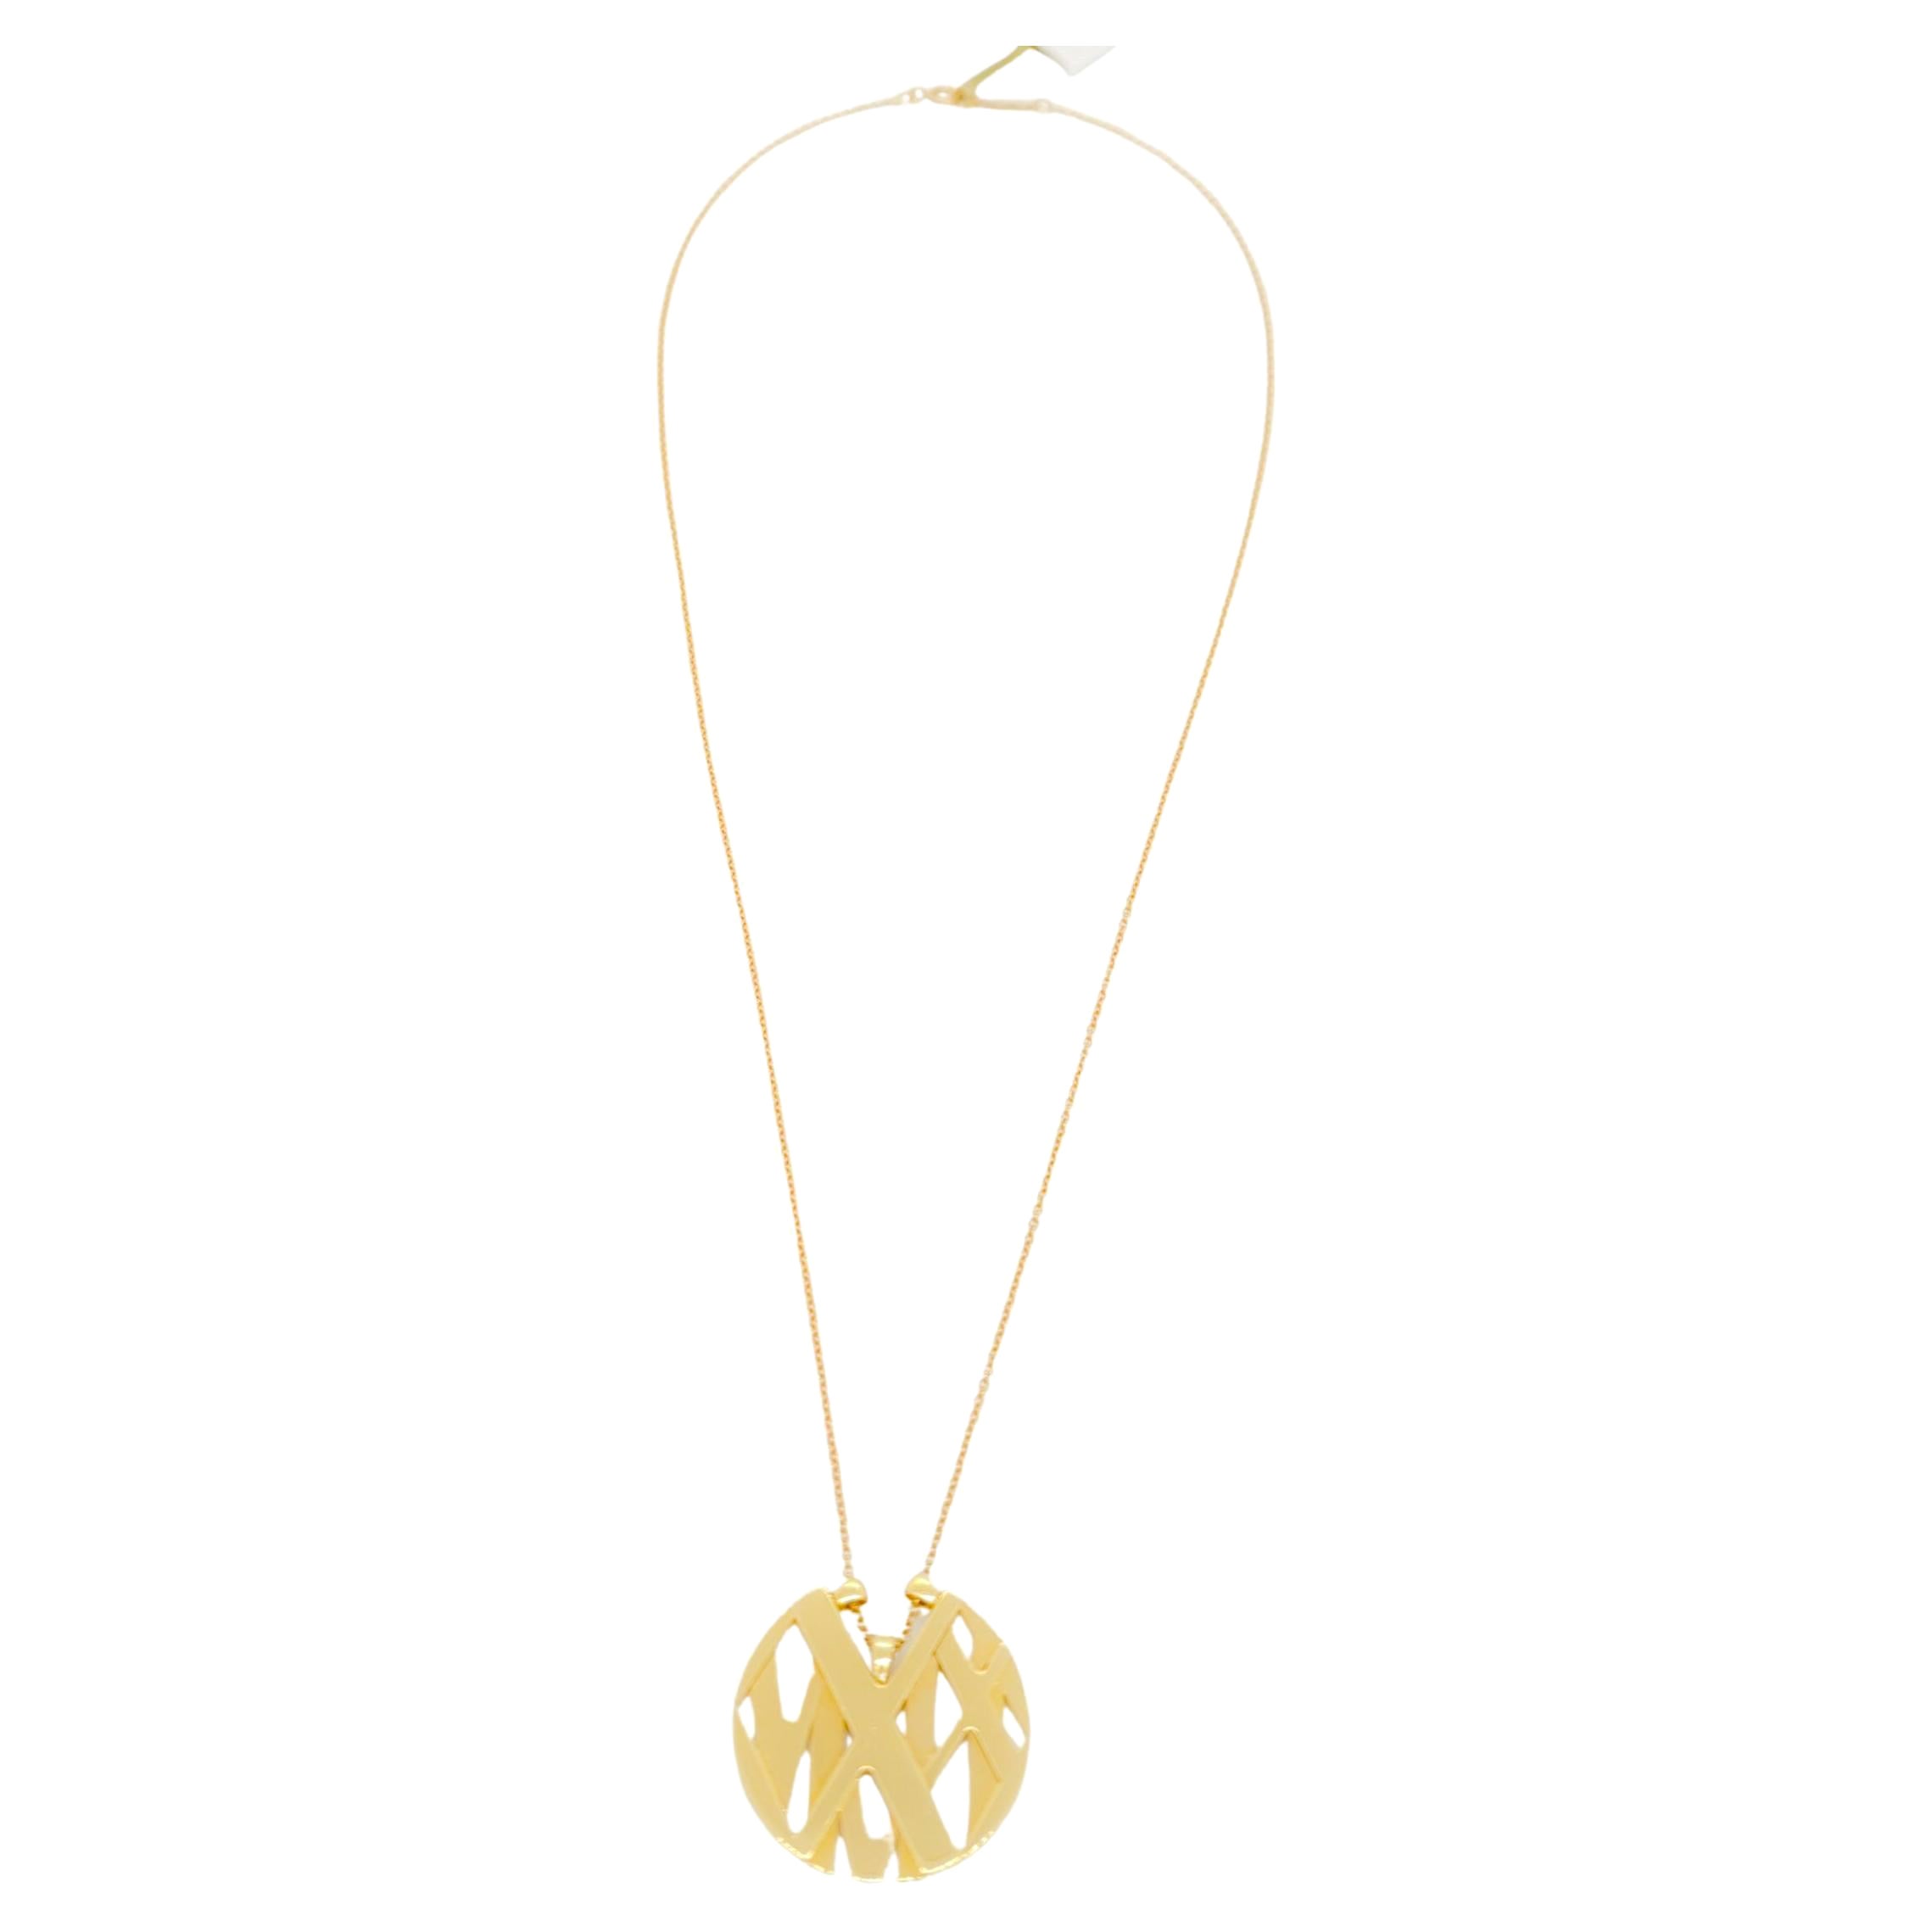 Estate Tiffany & Co. Atlas Round Pendant in 18k Yellow Gold Necklace